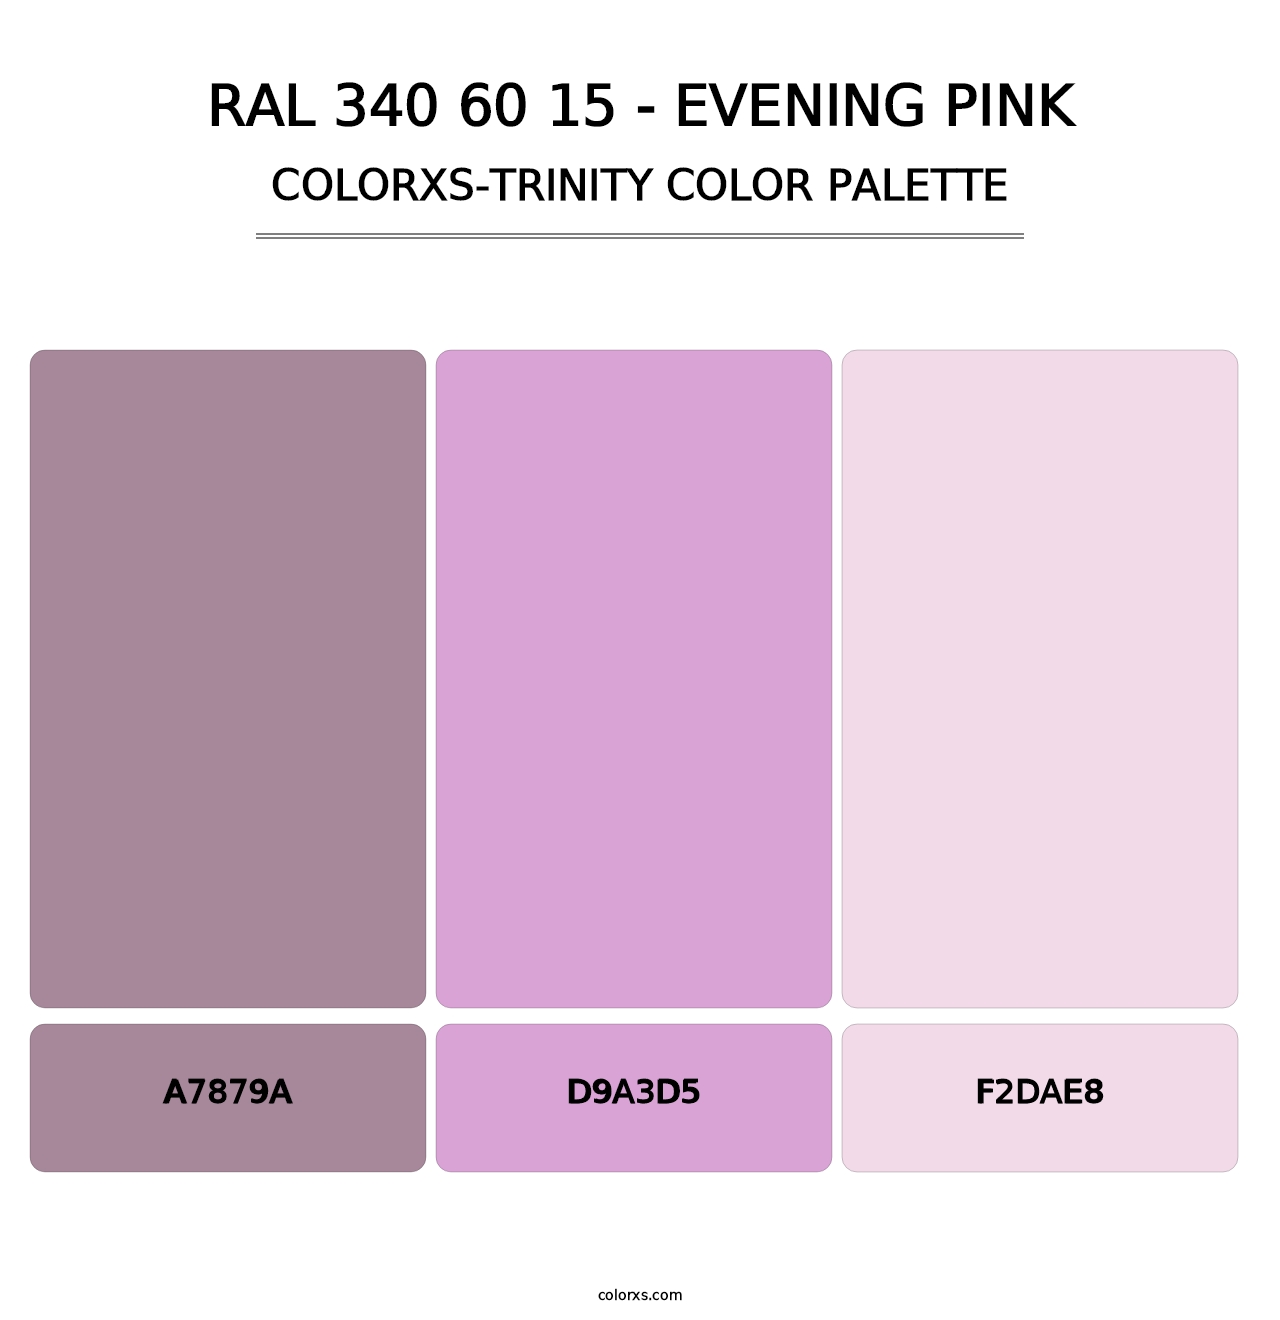 RAL 340 60 15 - Evening Pink - Colorxs Trinity Palette